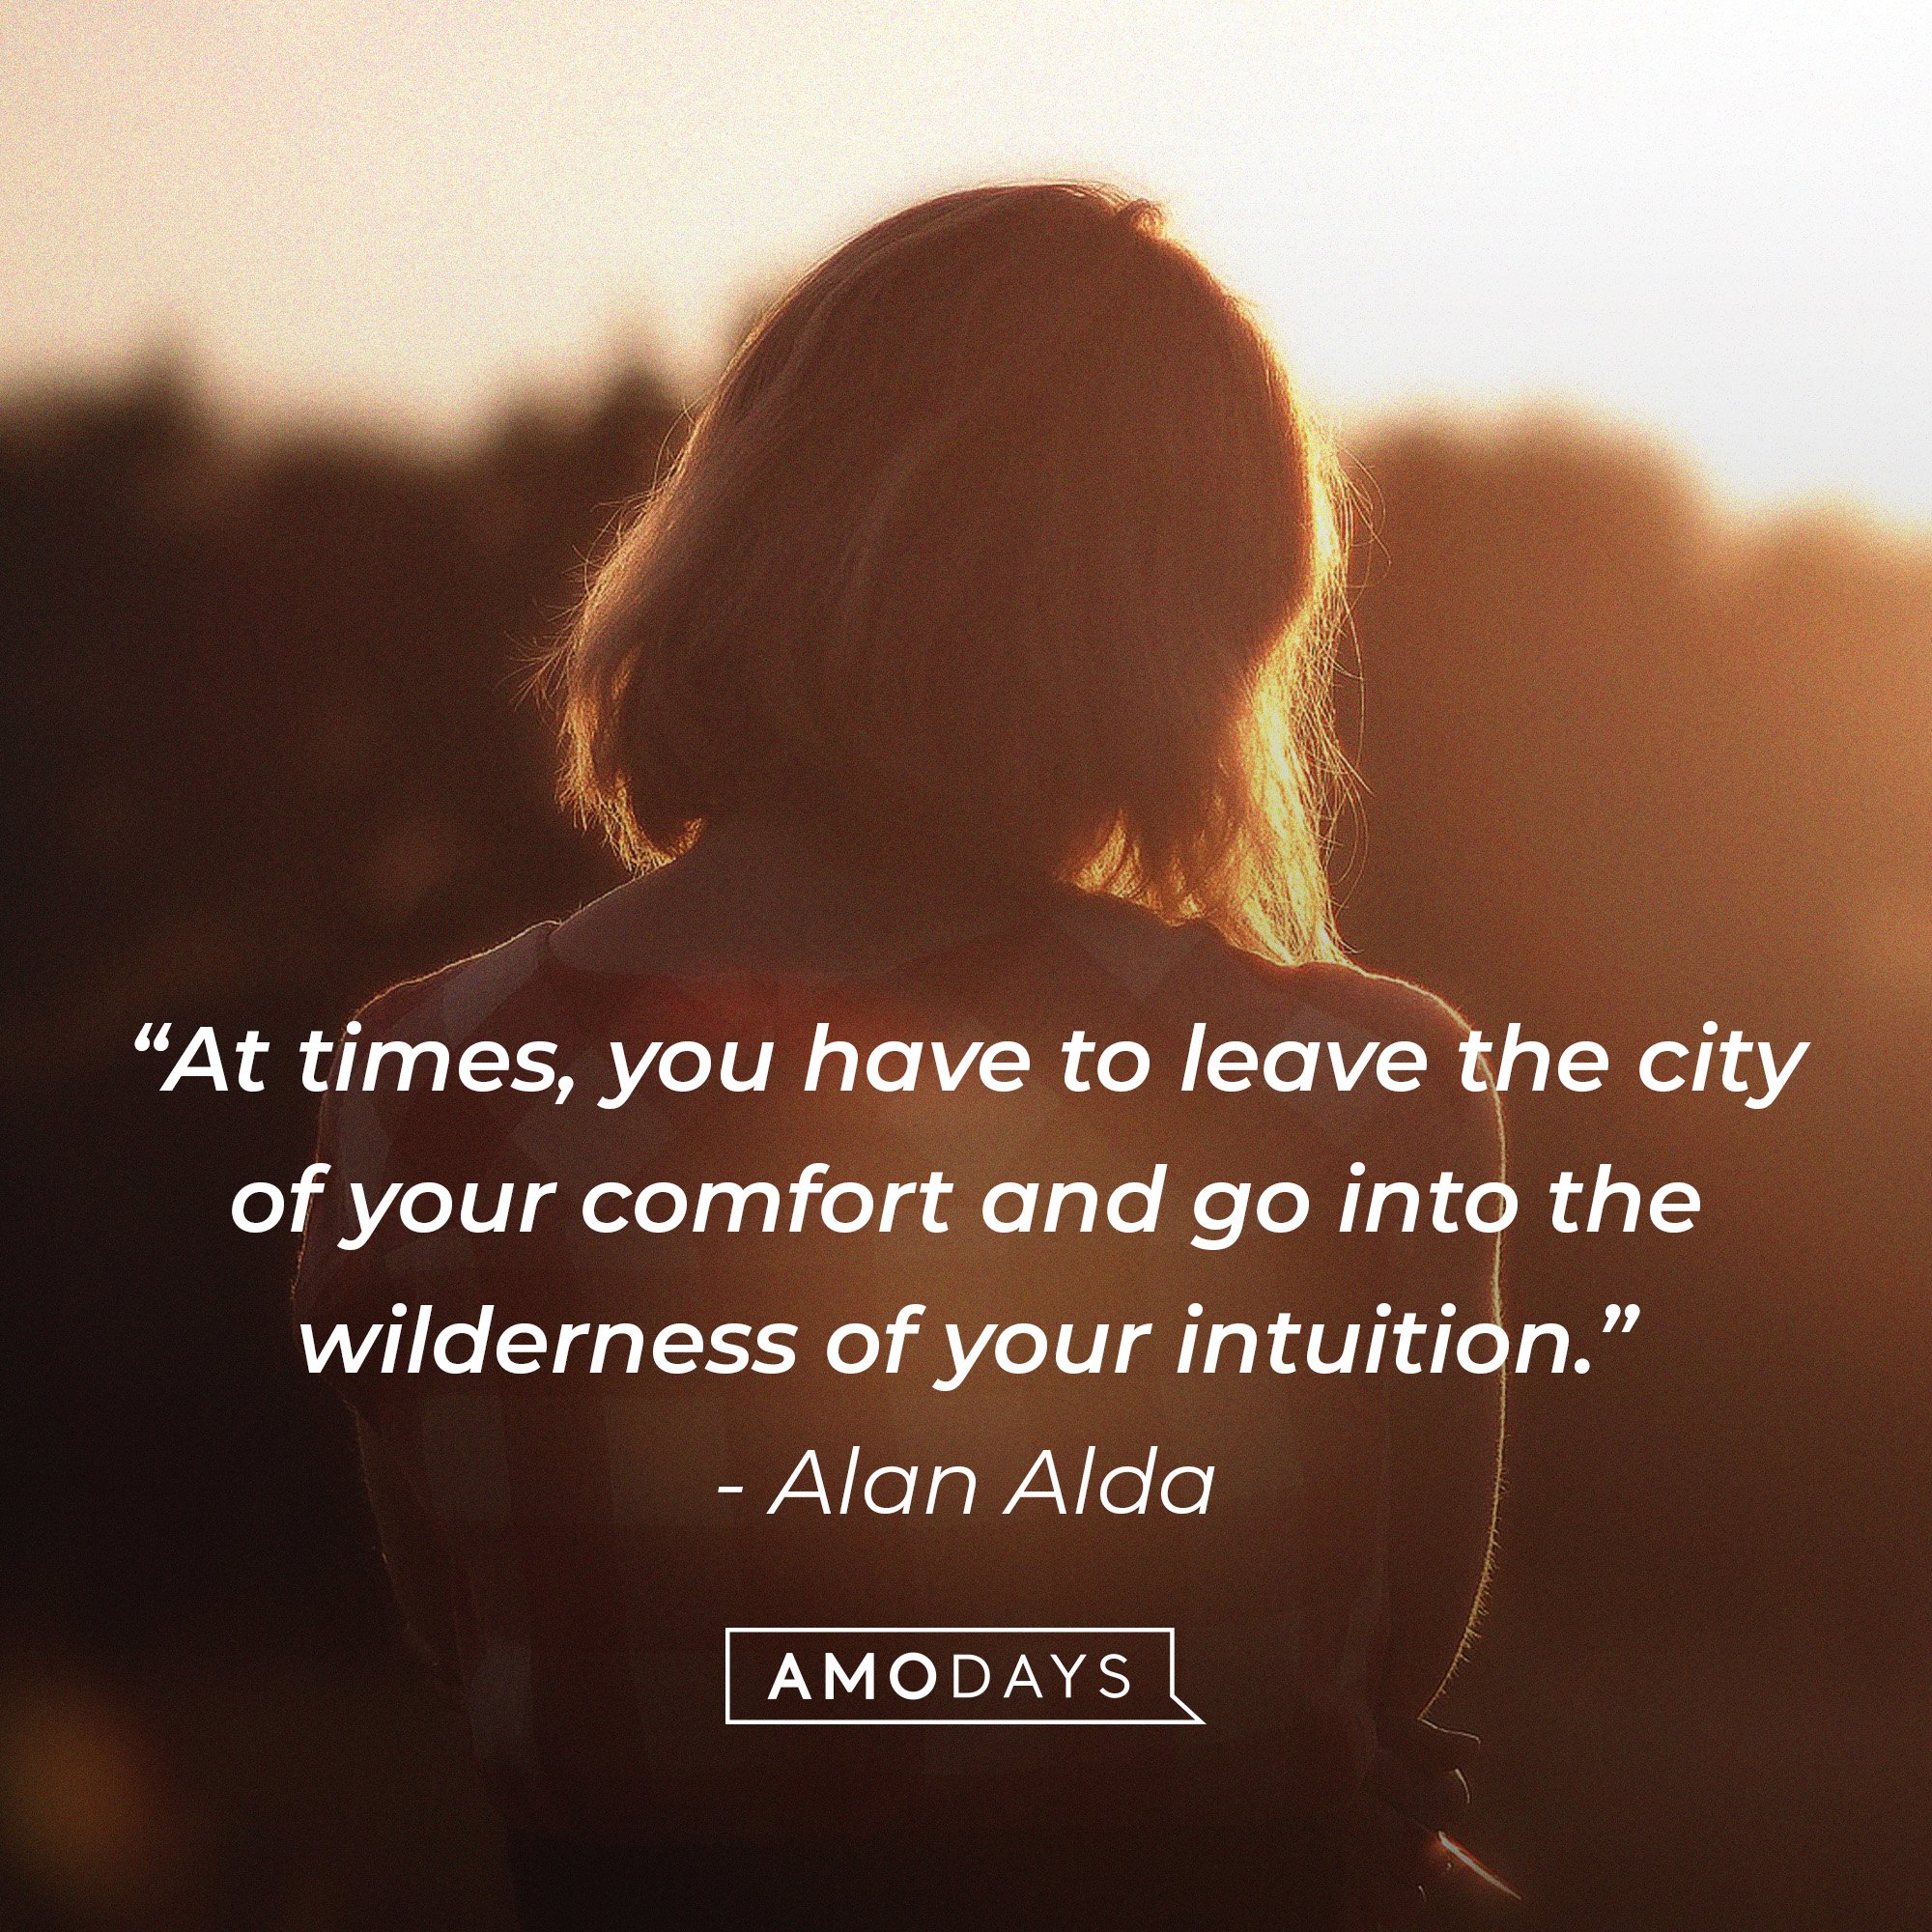 Alan Alda’s quote: “At times, you have to leave the city of your comfort and go into the wilderness of your intuition.” | Image: AmoDays